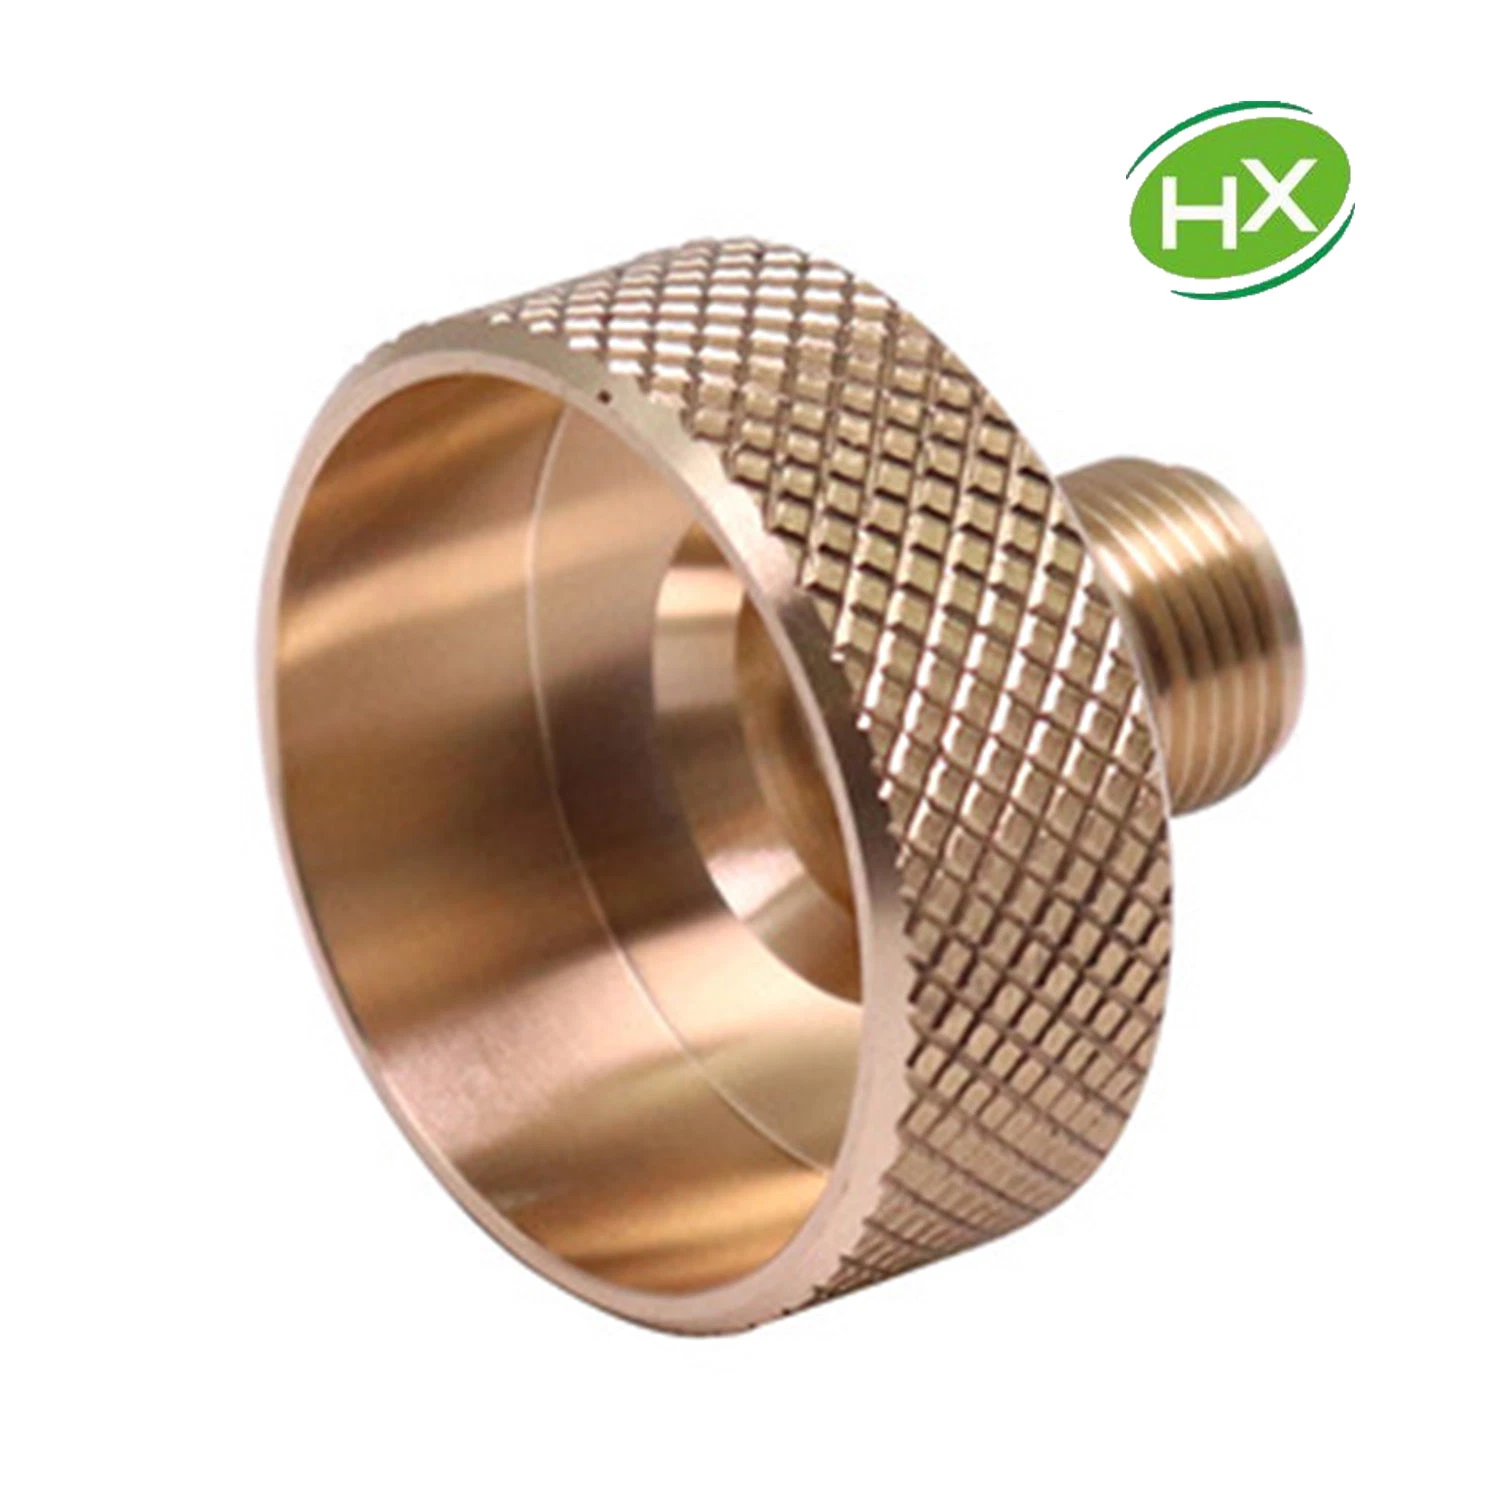 CNC Machinery Brass/Copper for Casting Metal Parts/Motor Accessories